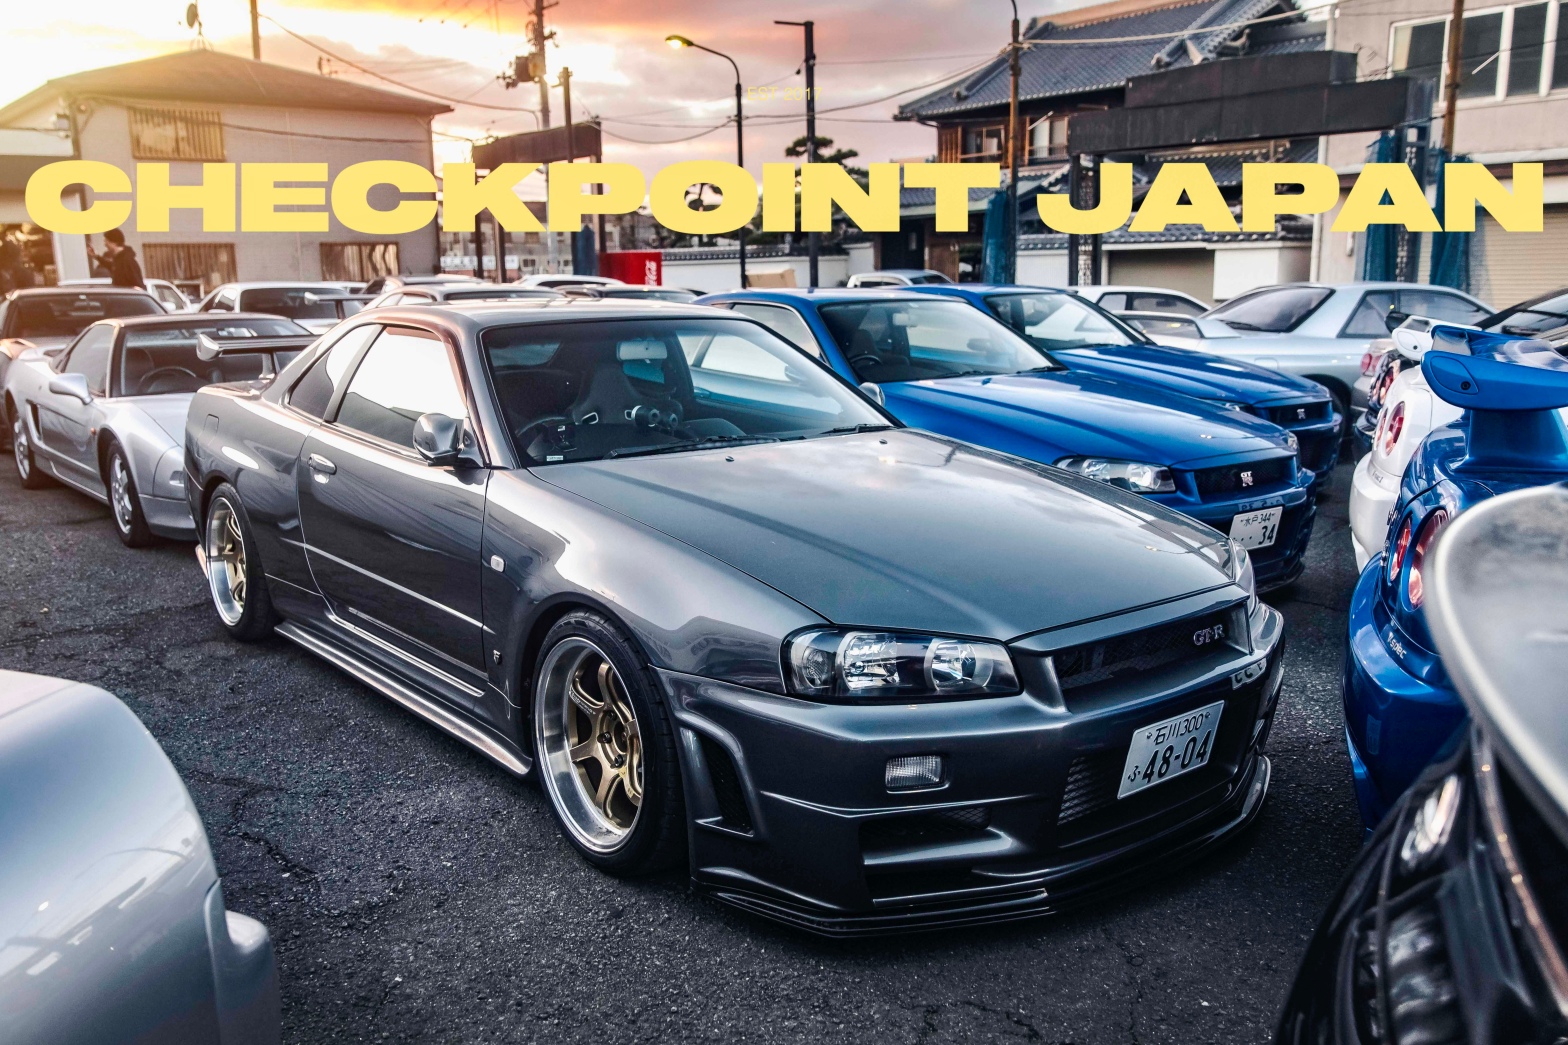 Tuning Shop OVERLOAD in Kansai! – Checkpoint Japan